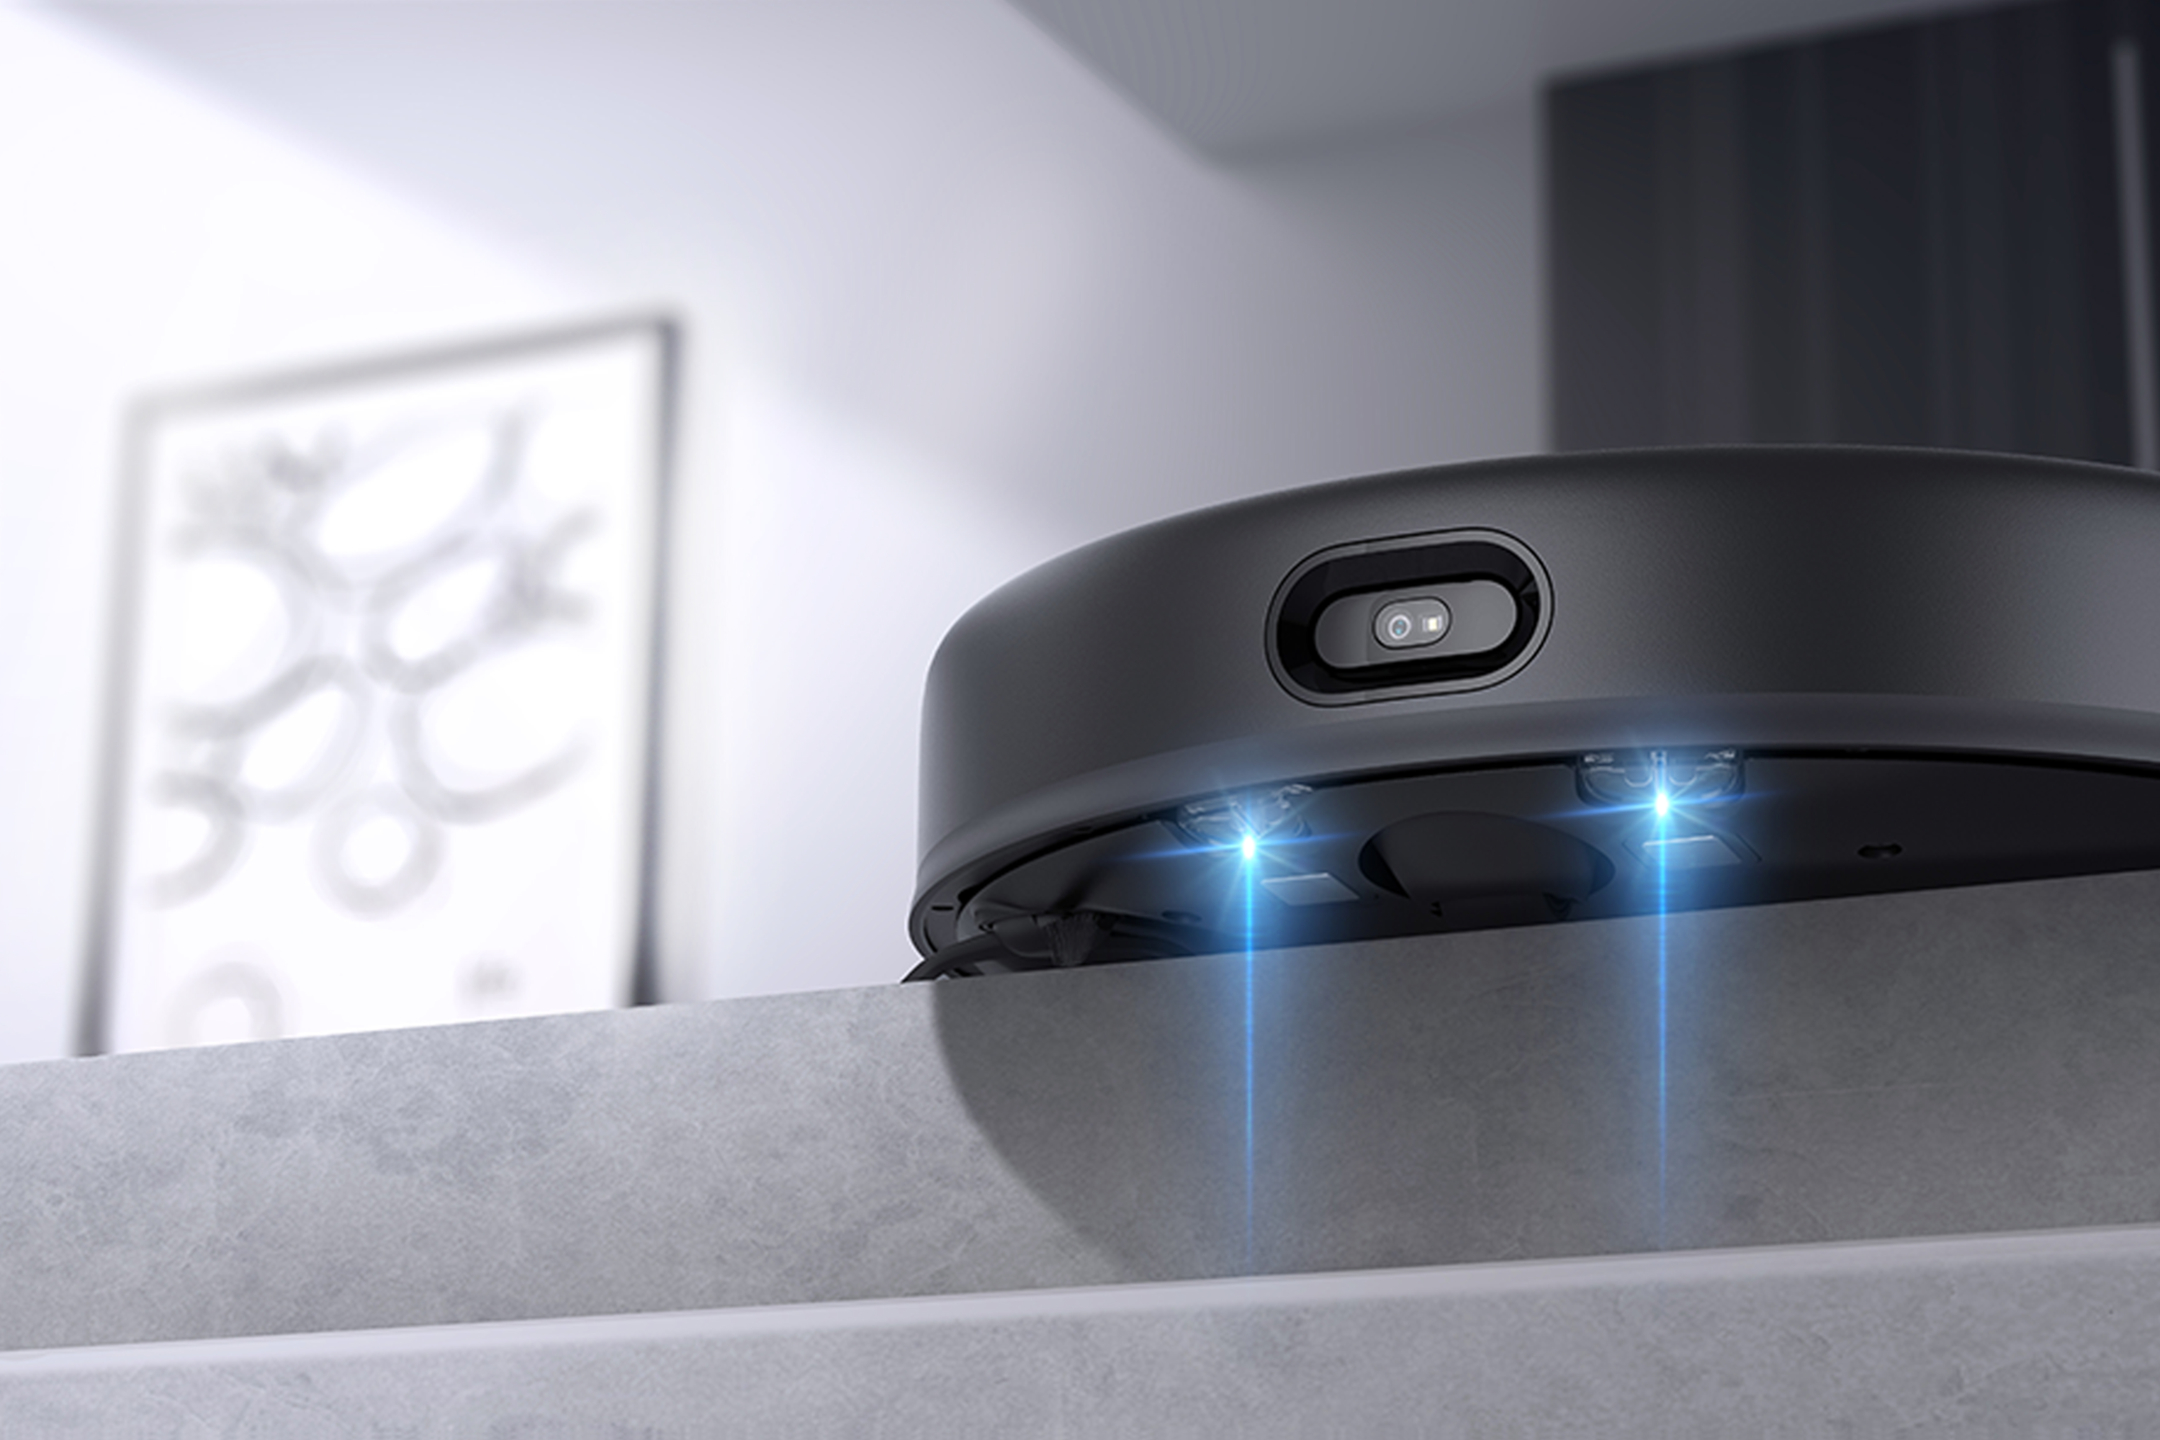 Xiaomi launches the Mi Robot in - NotebookCheck.net Vacuum-Mop from €299 2 Europe News series